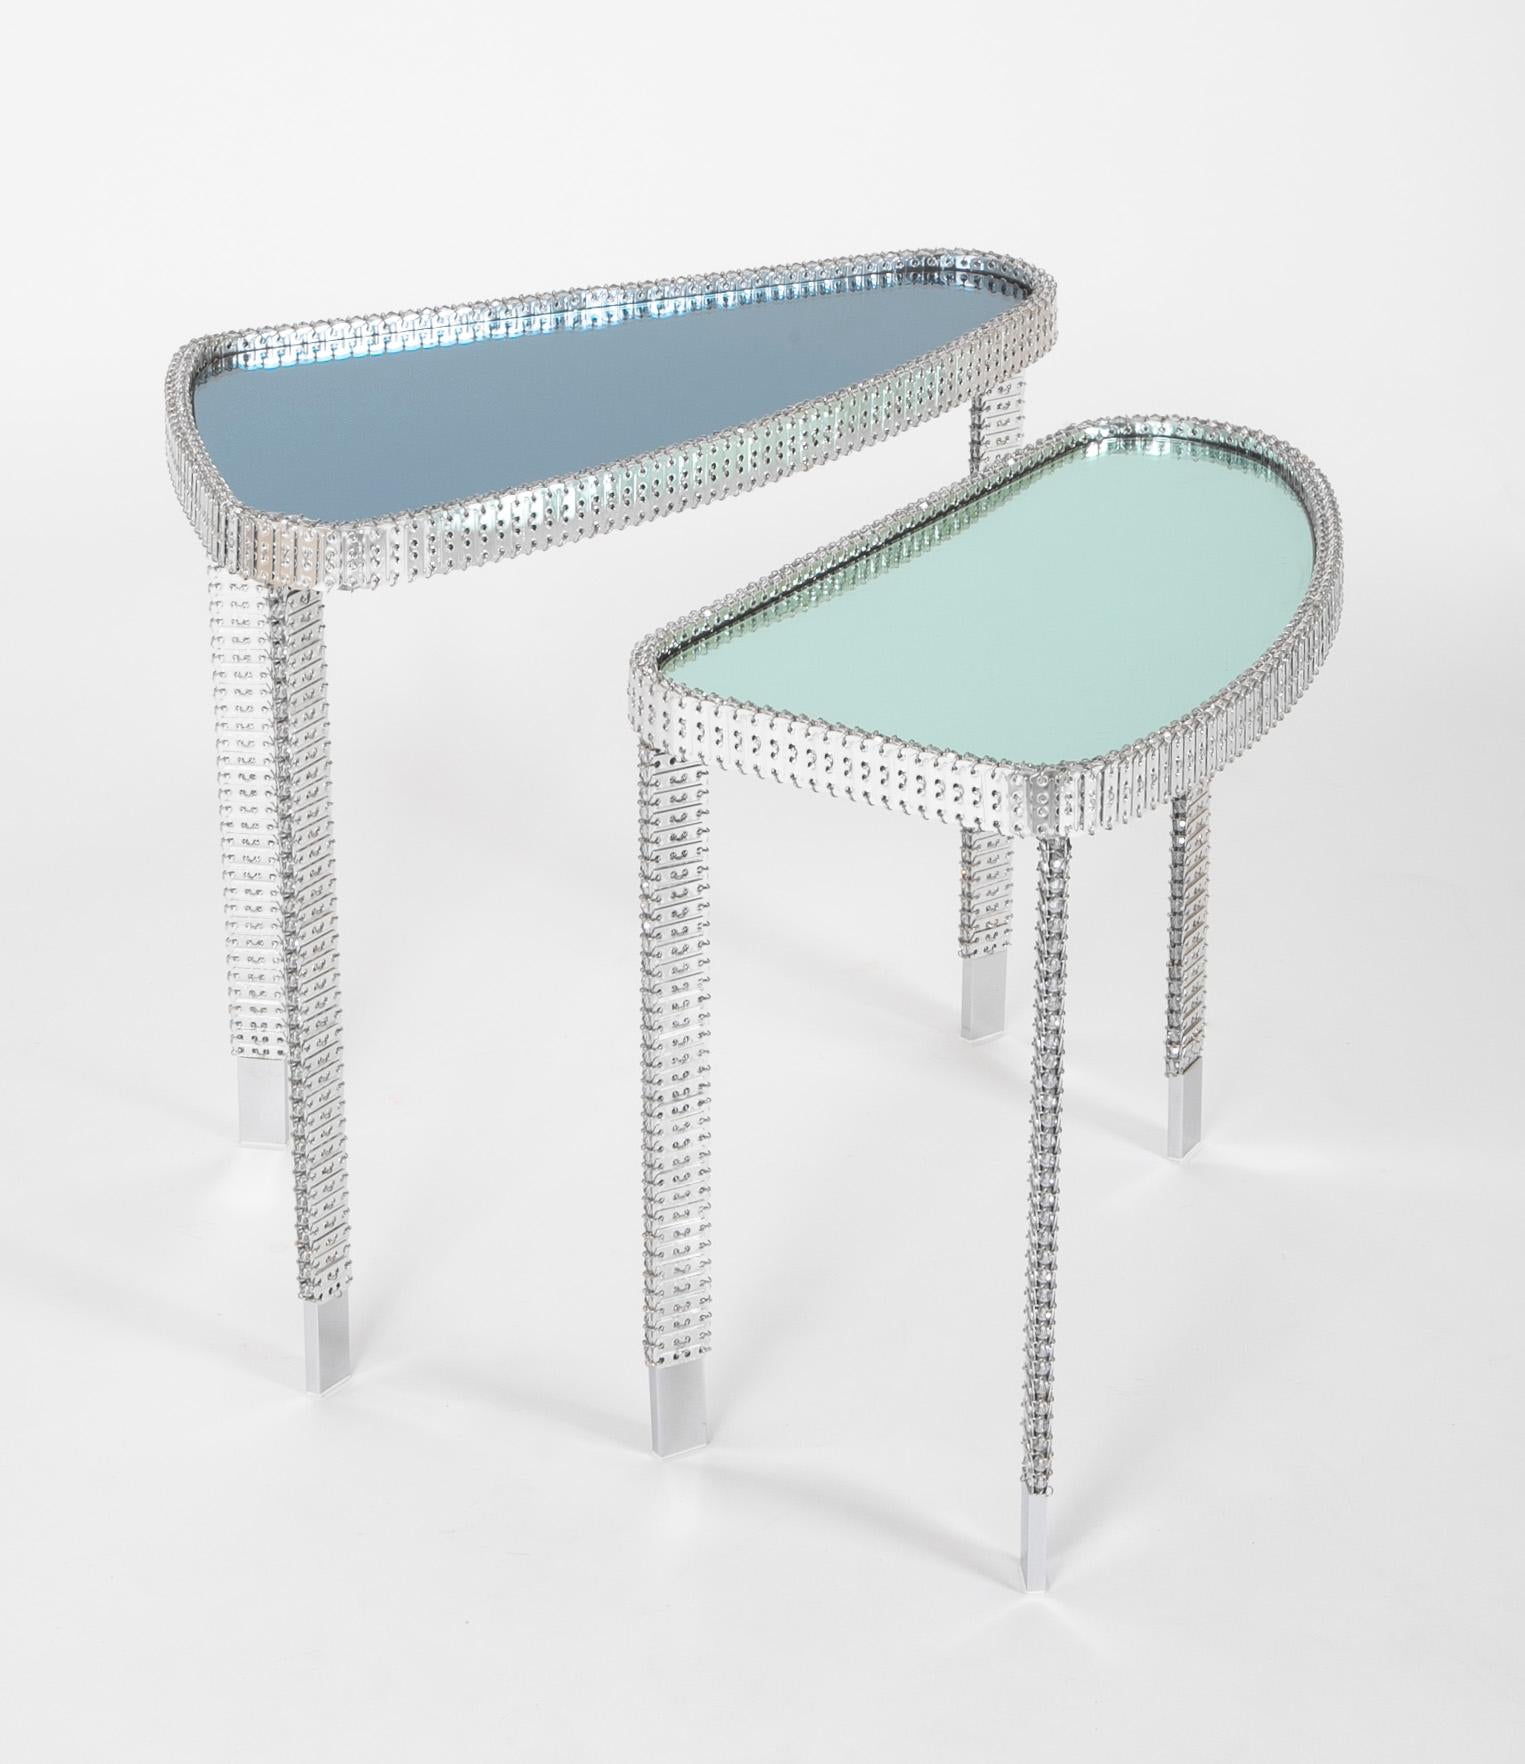 Unique pair of custom mirror top nesting tables by Philippe Montels with silver mesh trim set with Swarovski crystals. Circa 2016.

Measures: 1/ 20.5